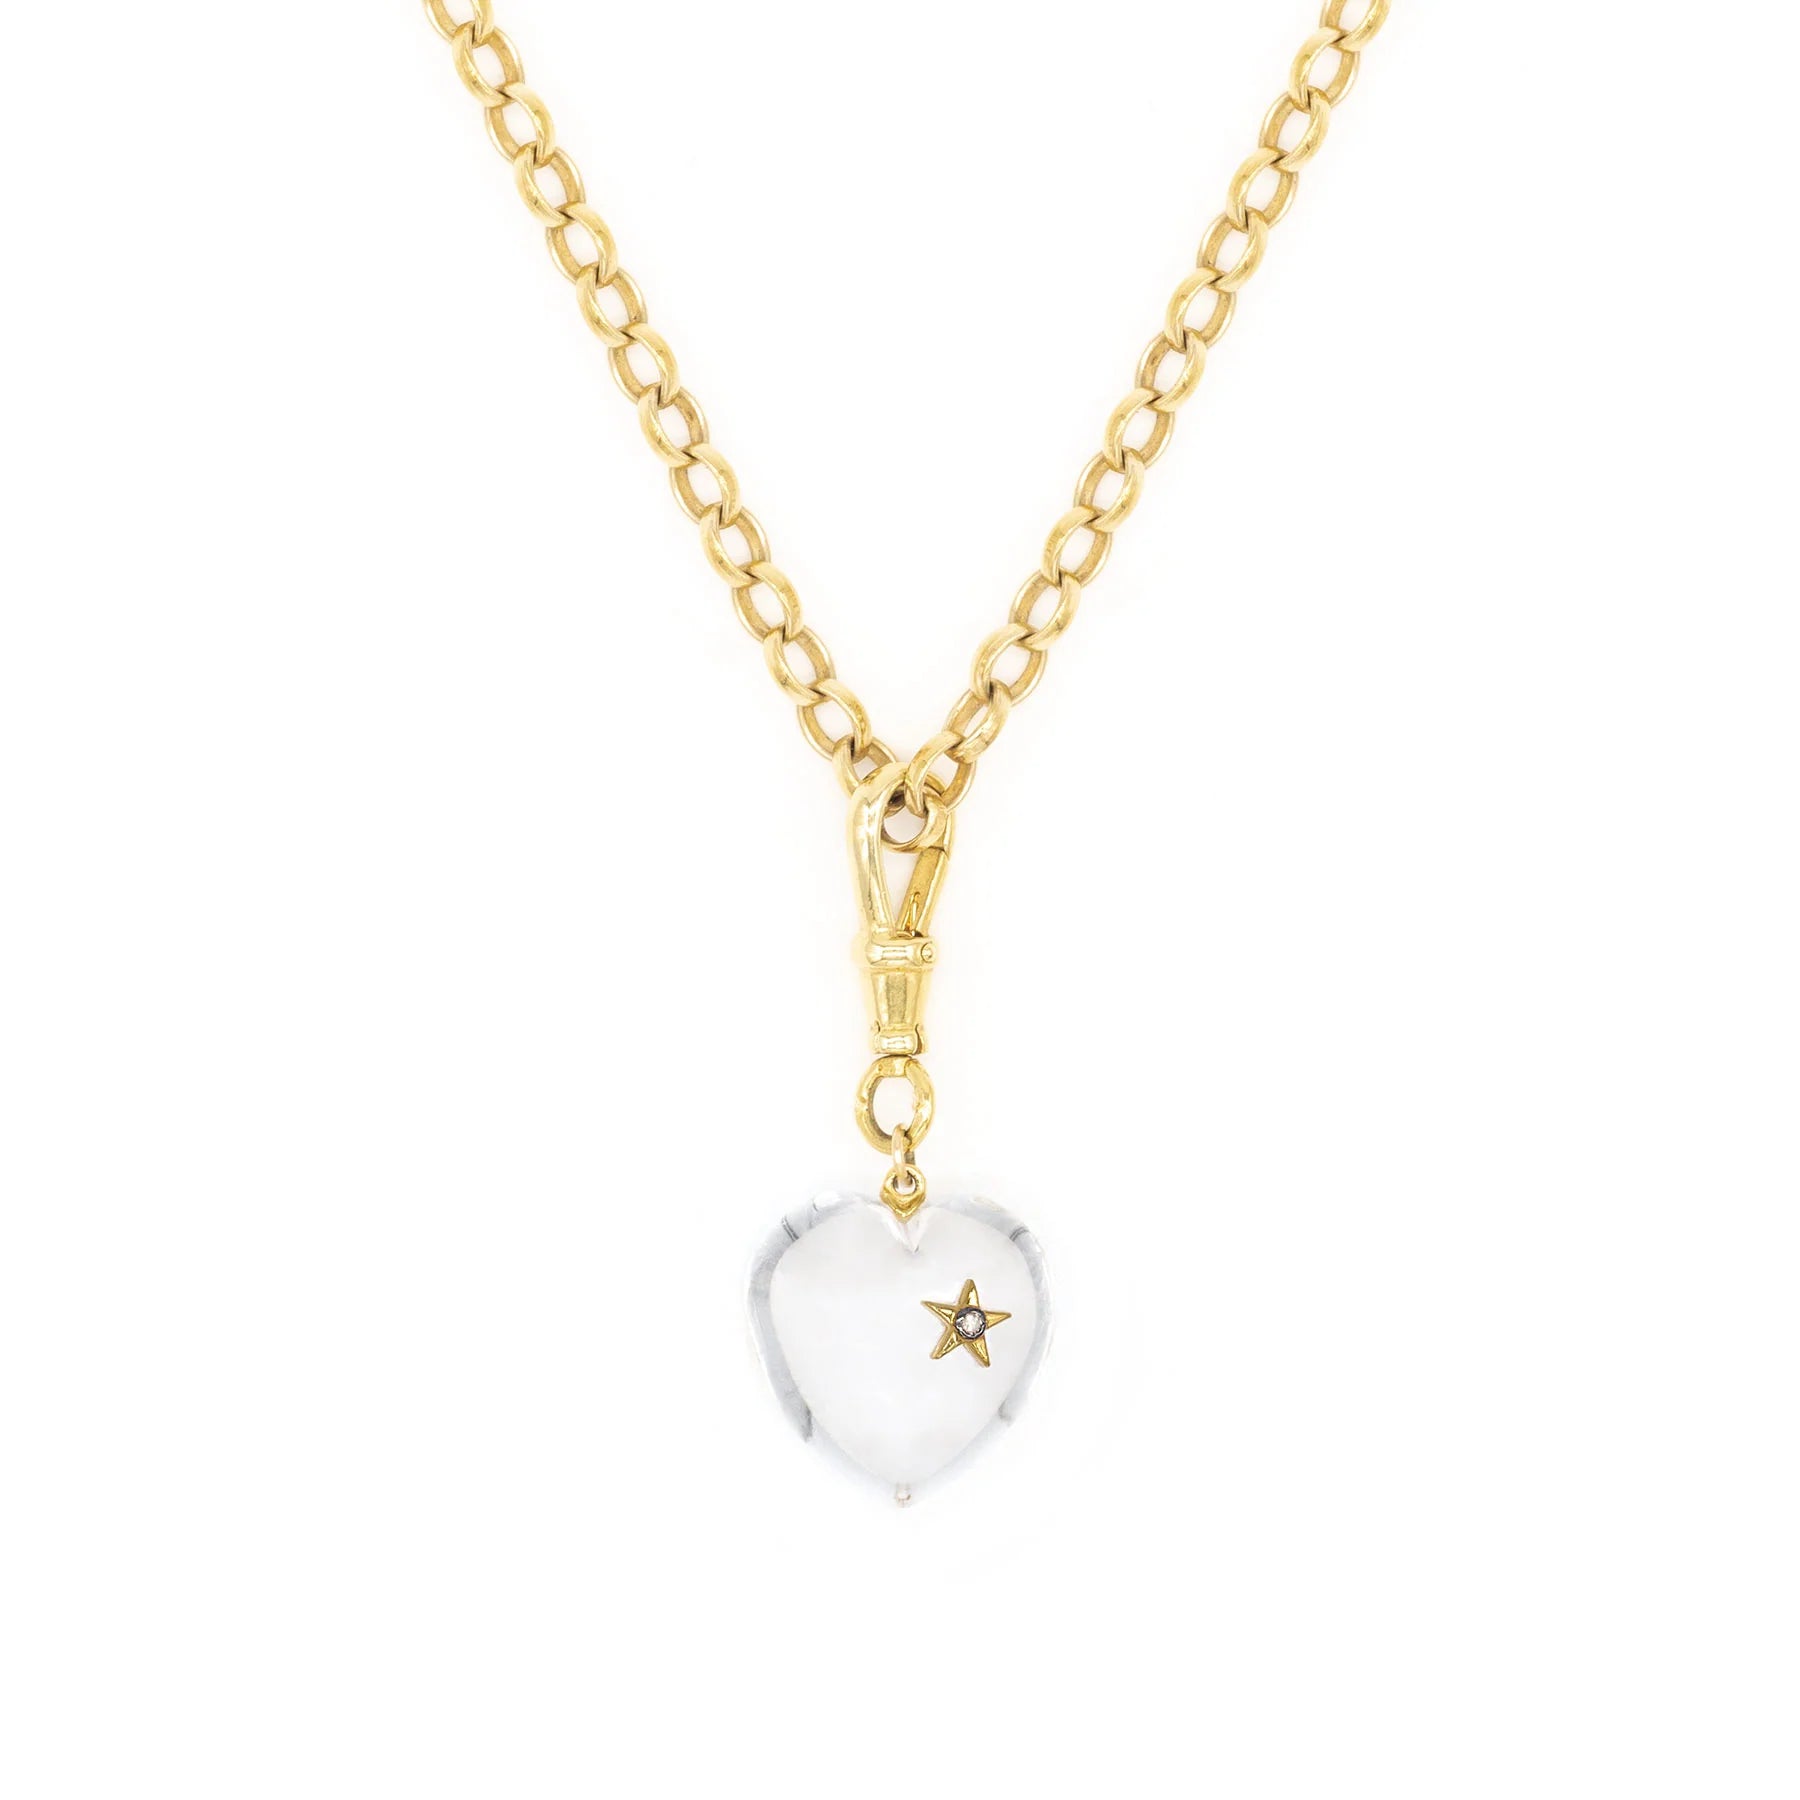 Chunky quartz heart pendant with a star and diamond detail on a gold plated sterling silver belcher chain